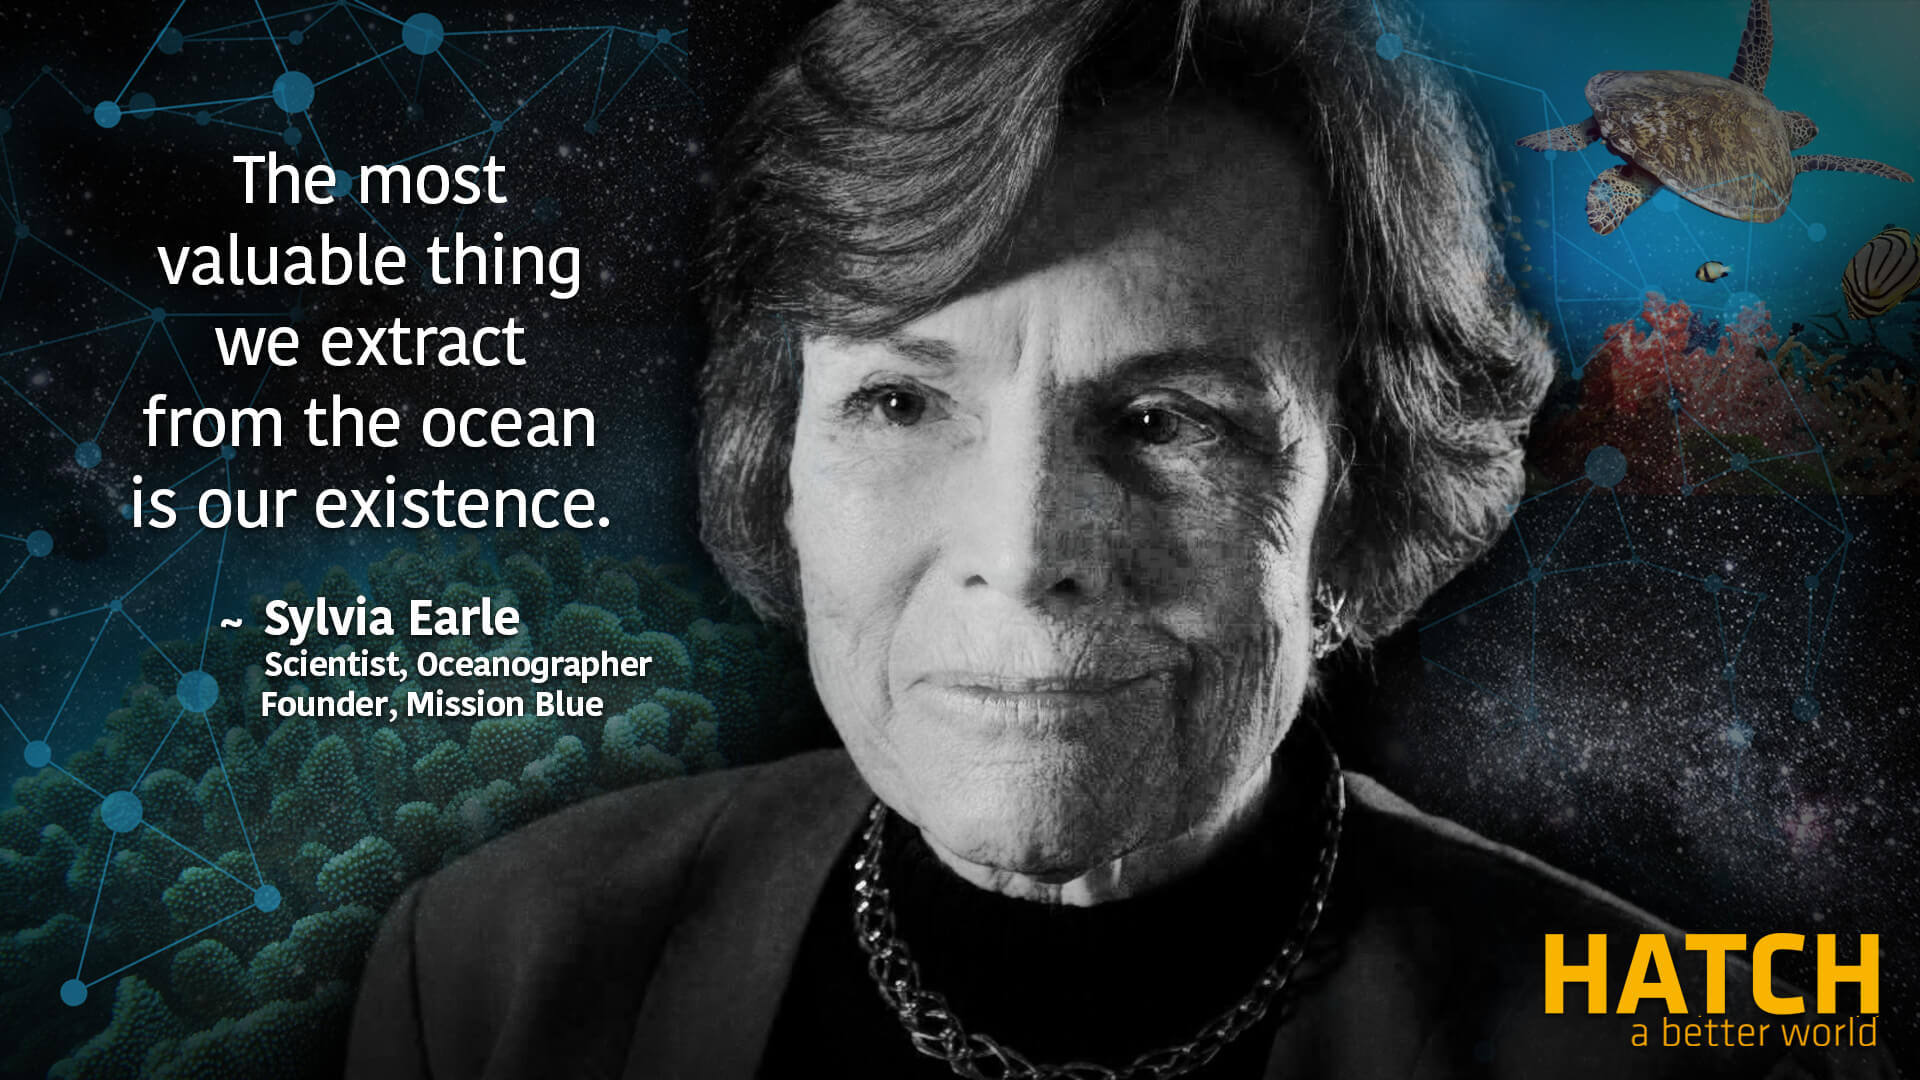 Dr Sylvia Earle Activates                 the HATCH Network